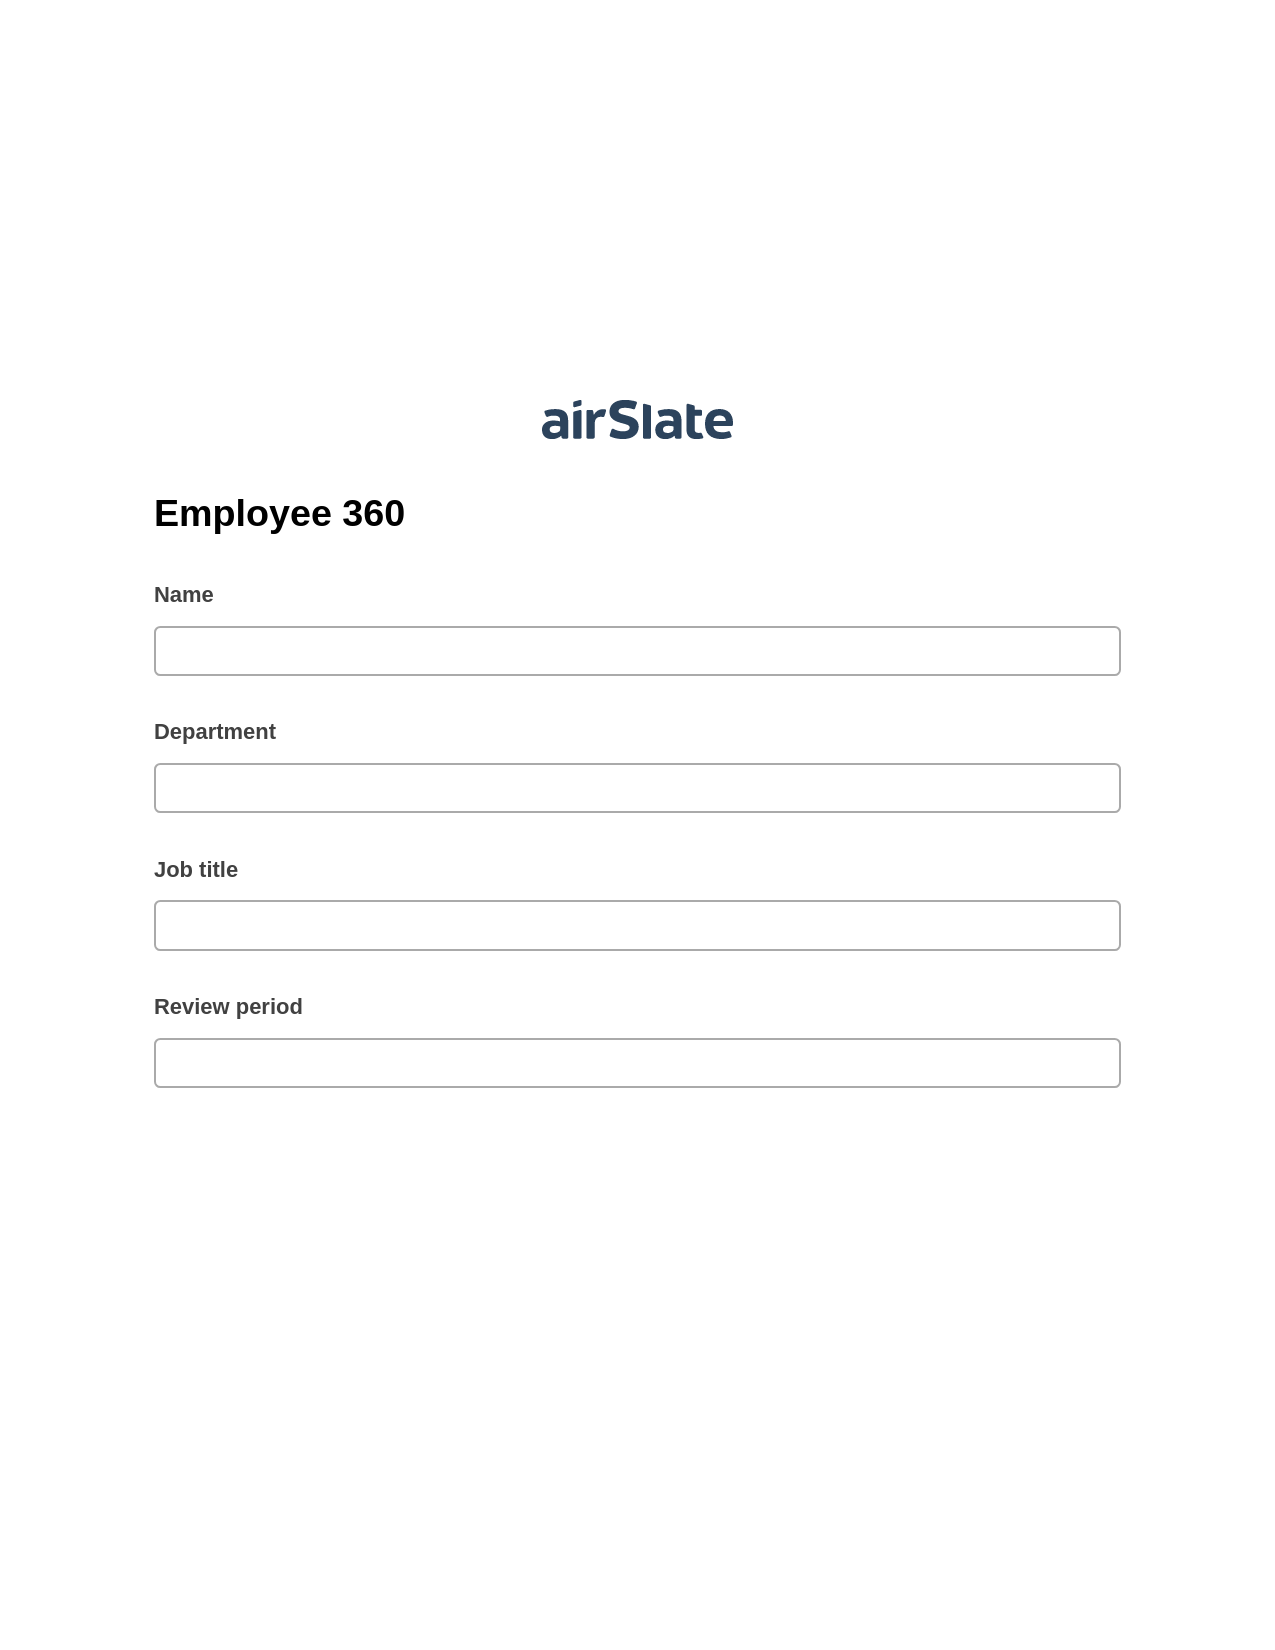 Employee 360 Pre-fill from MS Dynamics 365 Records, Google Cloud Print Bot, Export to Smartsheet